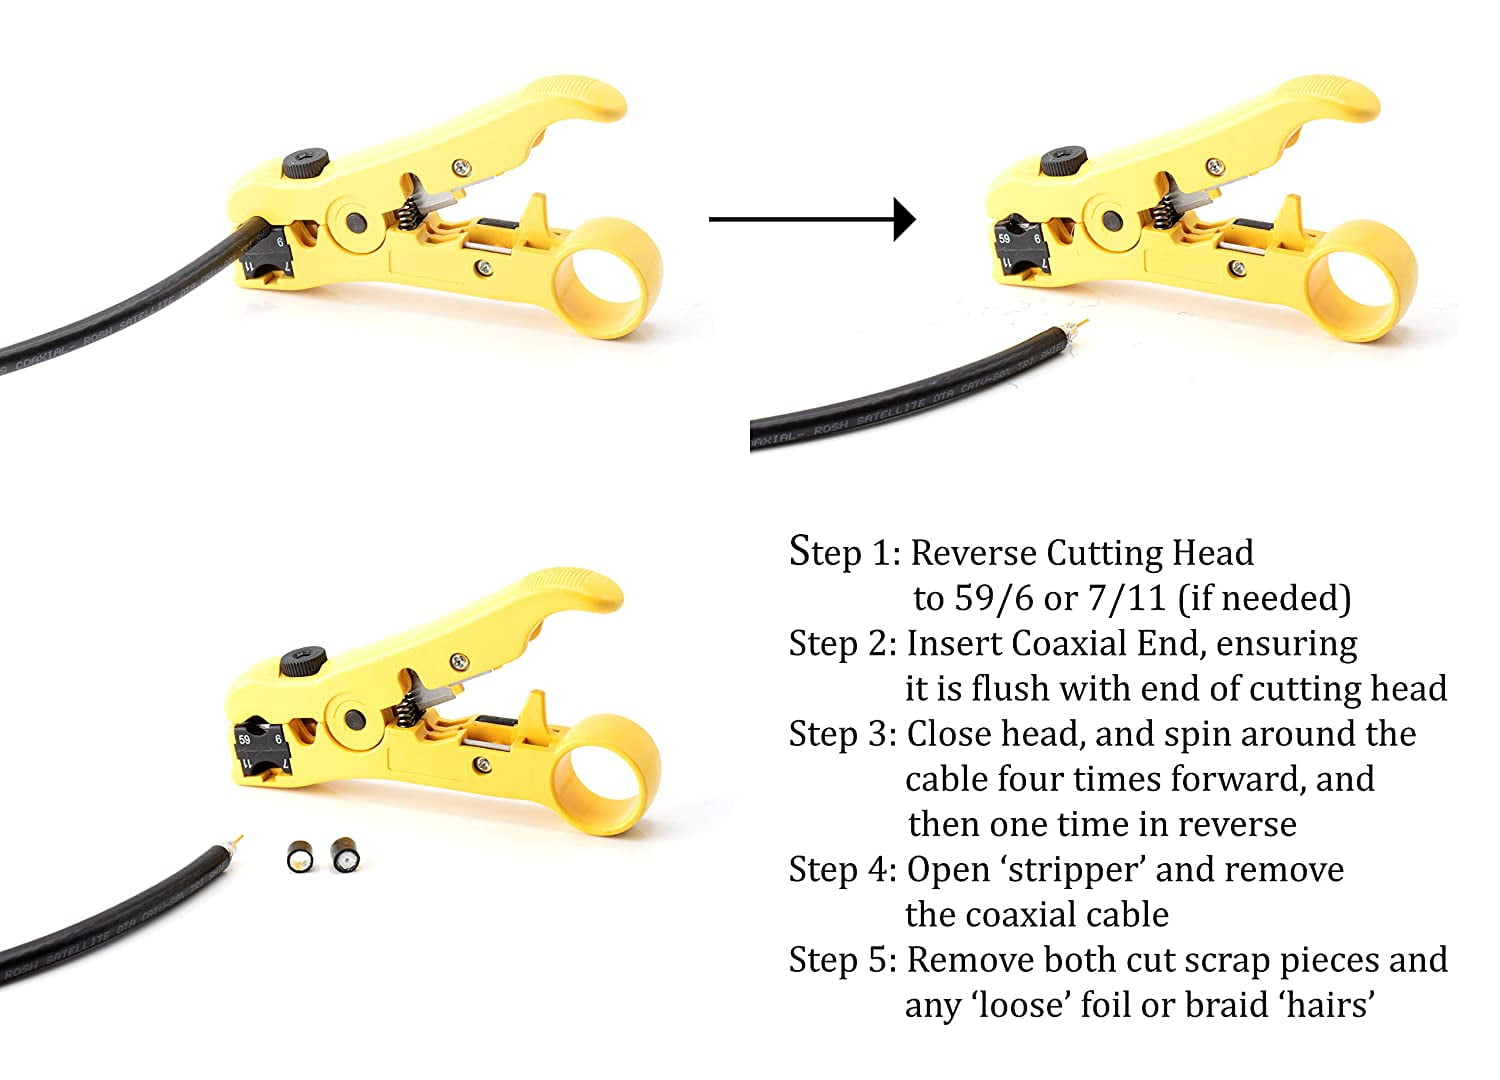 Speedy Coax Coaxial Cable Cutter Stripper Tool for RG6 RG59 RG7 RG11 Cat5/6Bju 